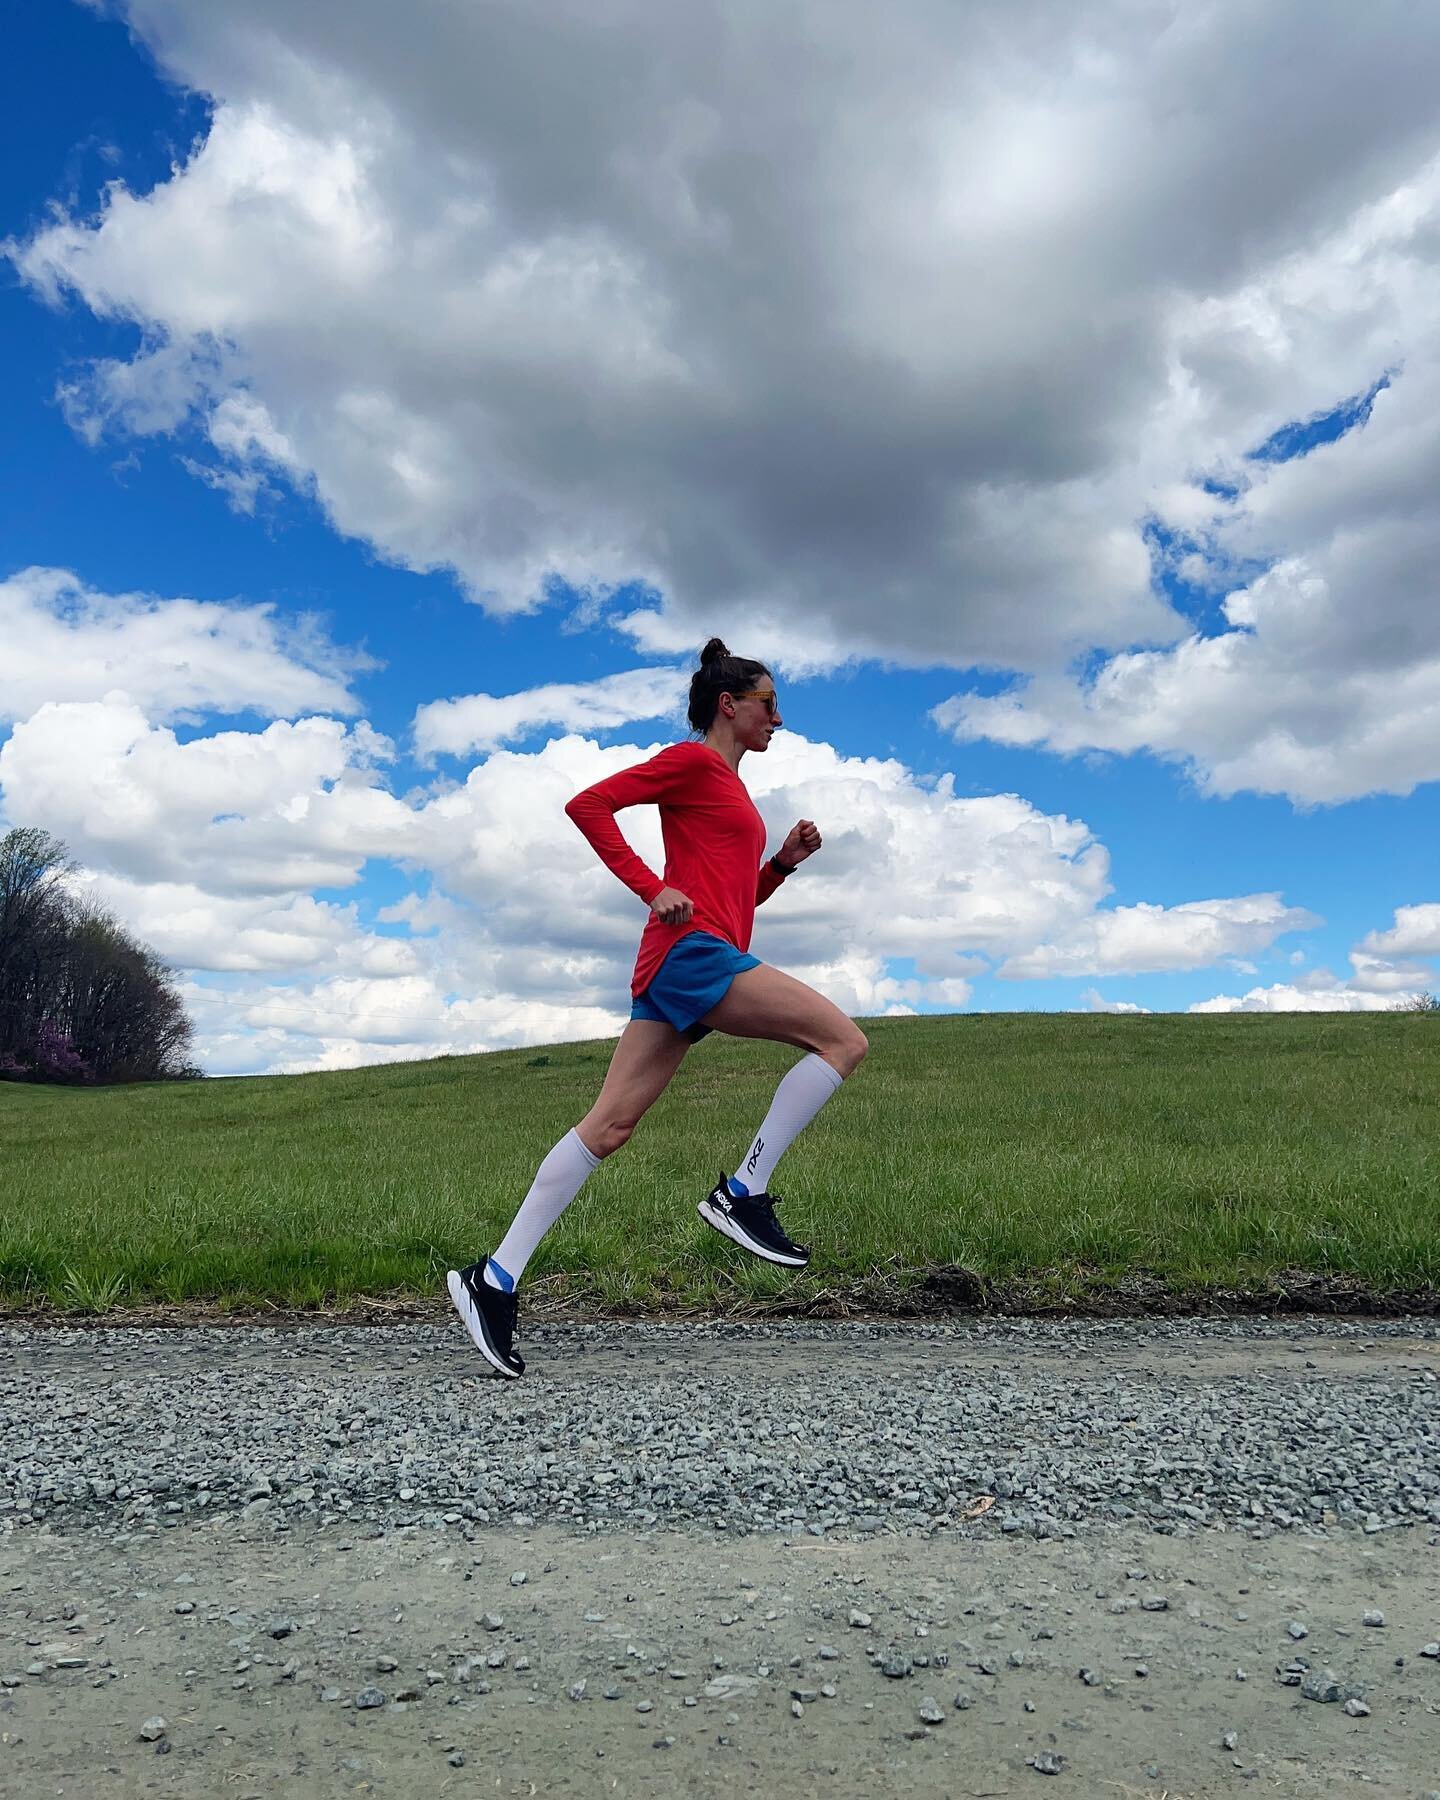 Swipe to help me run! ➡️

11 miles for this morning&rsquo;s long run, including just over 9 with my friend Rachel, to kick off the weekend just right. 🎉 A brisk just over 50 degrees with a breeze, plus lots of nice clouds and conversation.

Crazy to